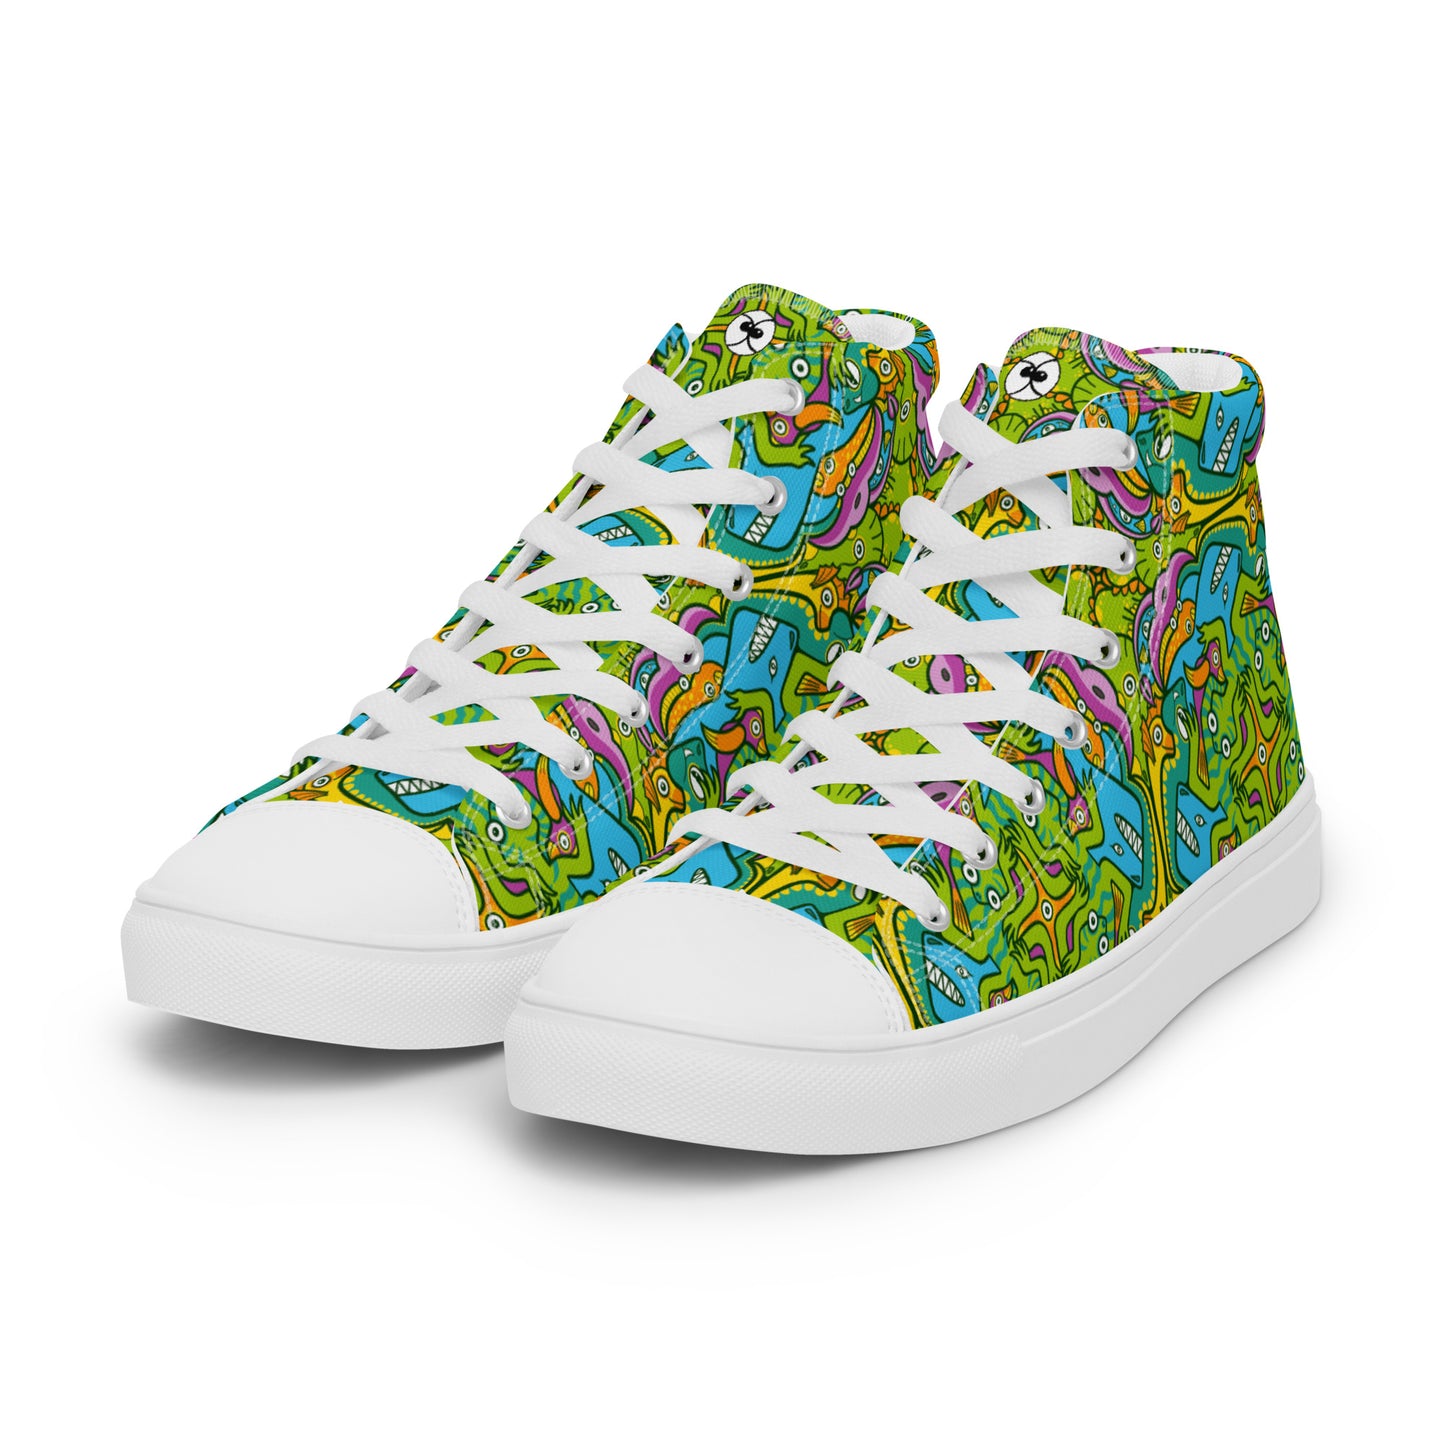 To keep calm and doodle is more than just doodling Men’s high top canvas shoes. Overview